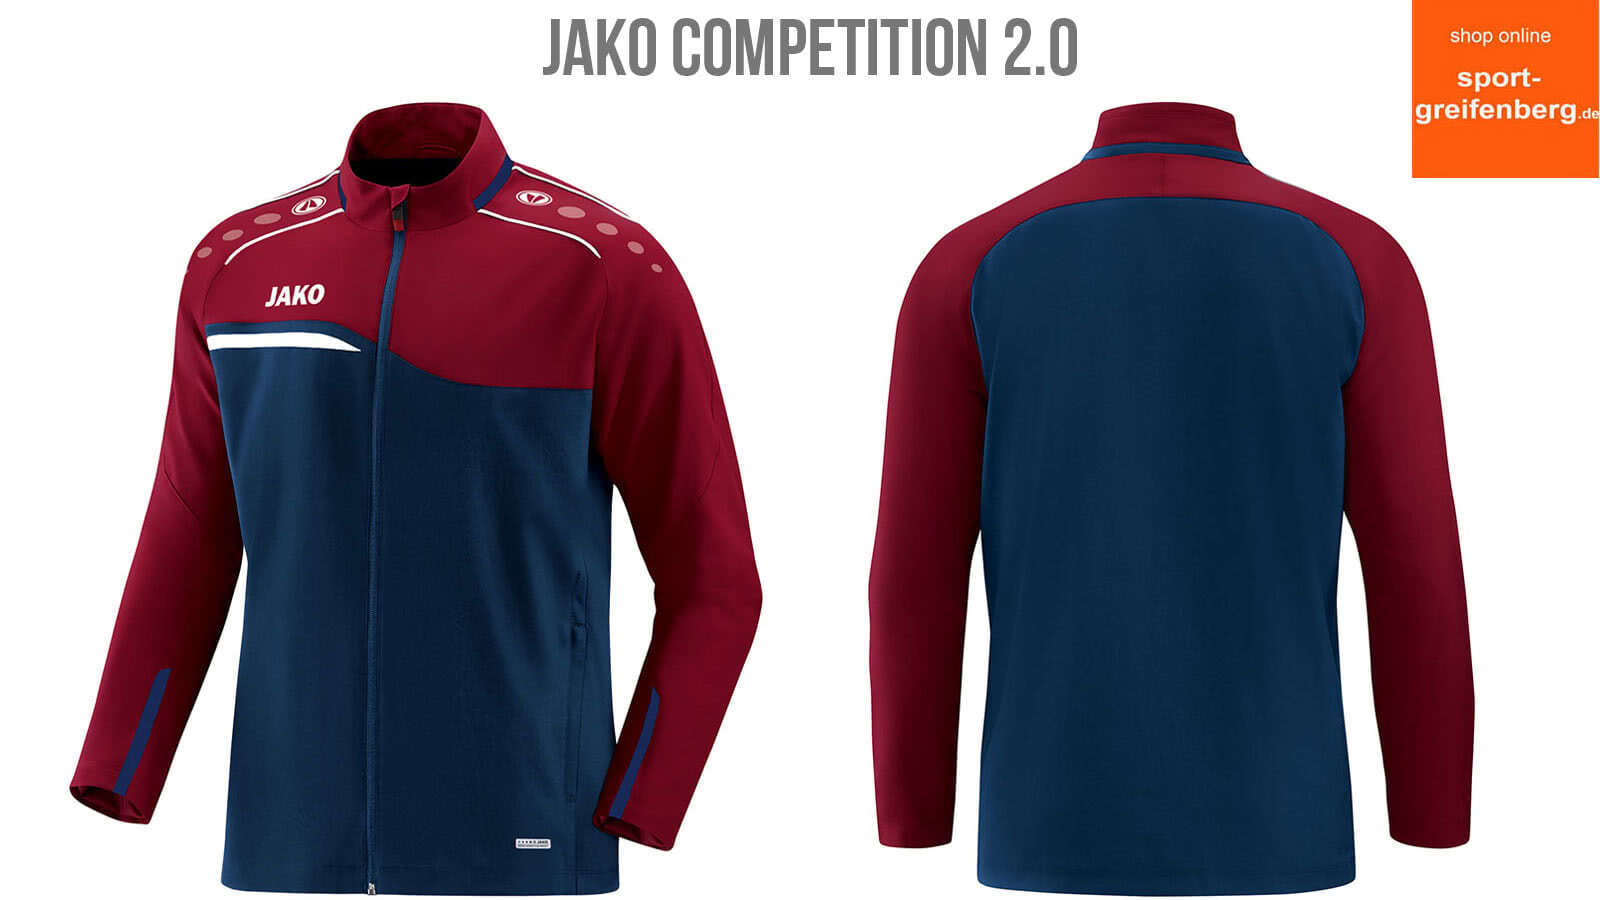 Die Jako Competition 2.0 Line